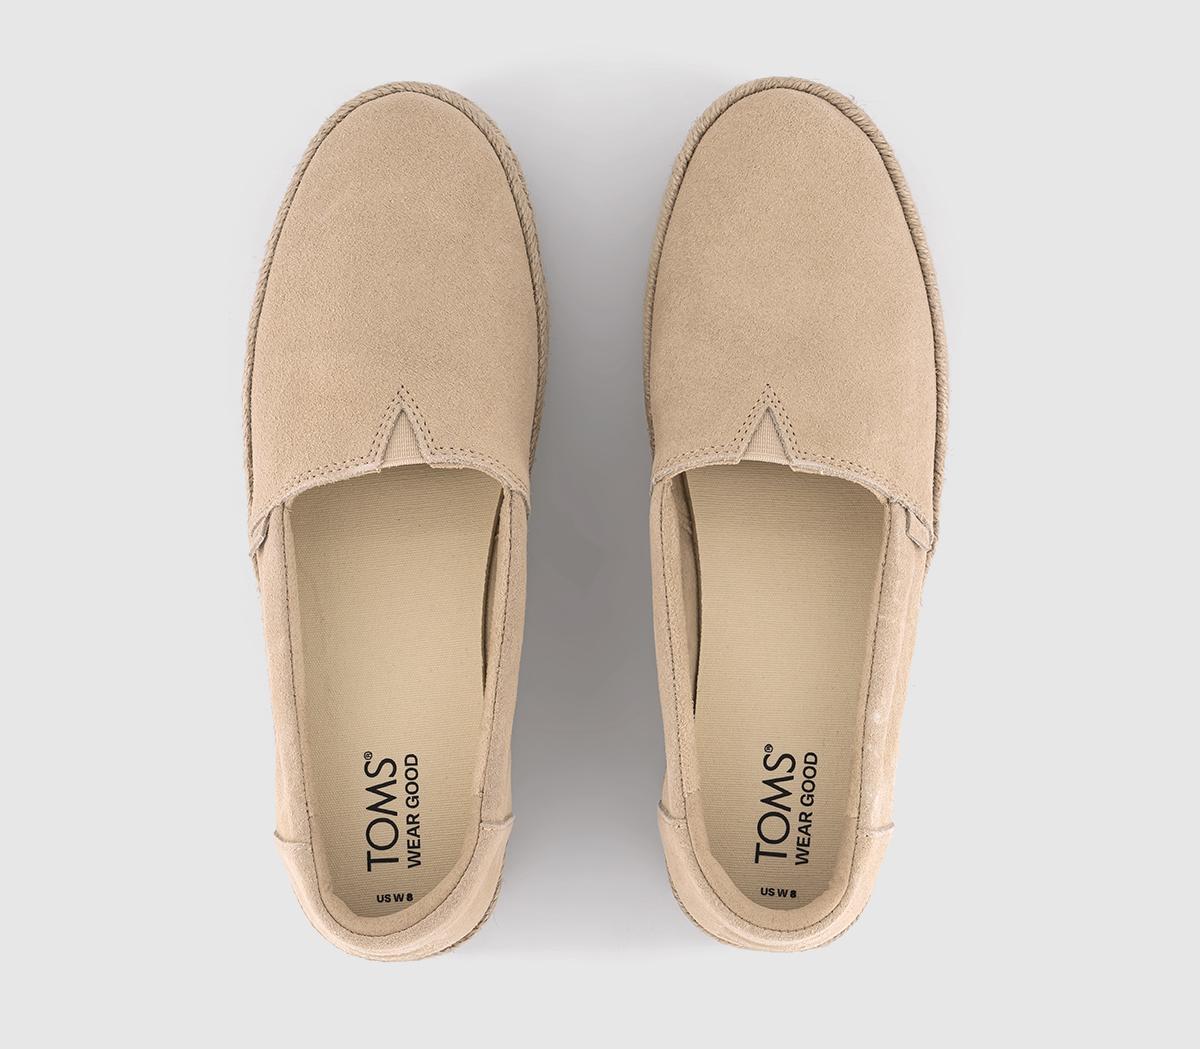 TOMS Valencia Espadrilles Oatmeal Suede - Flat Shoes for Women